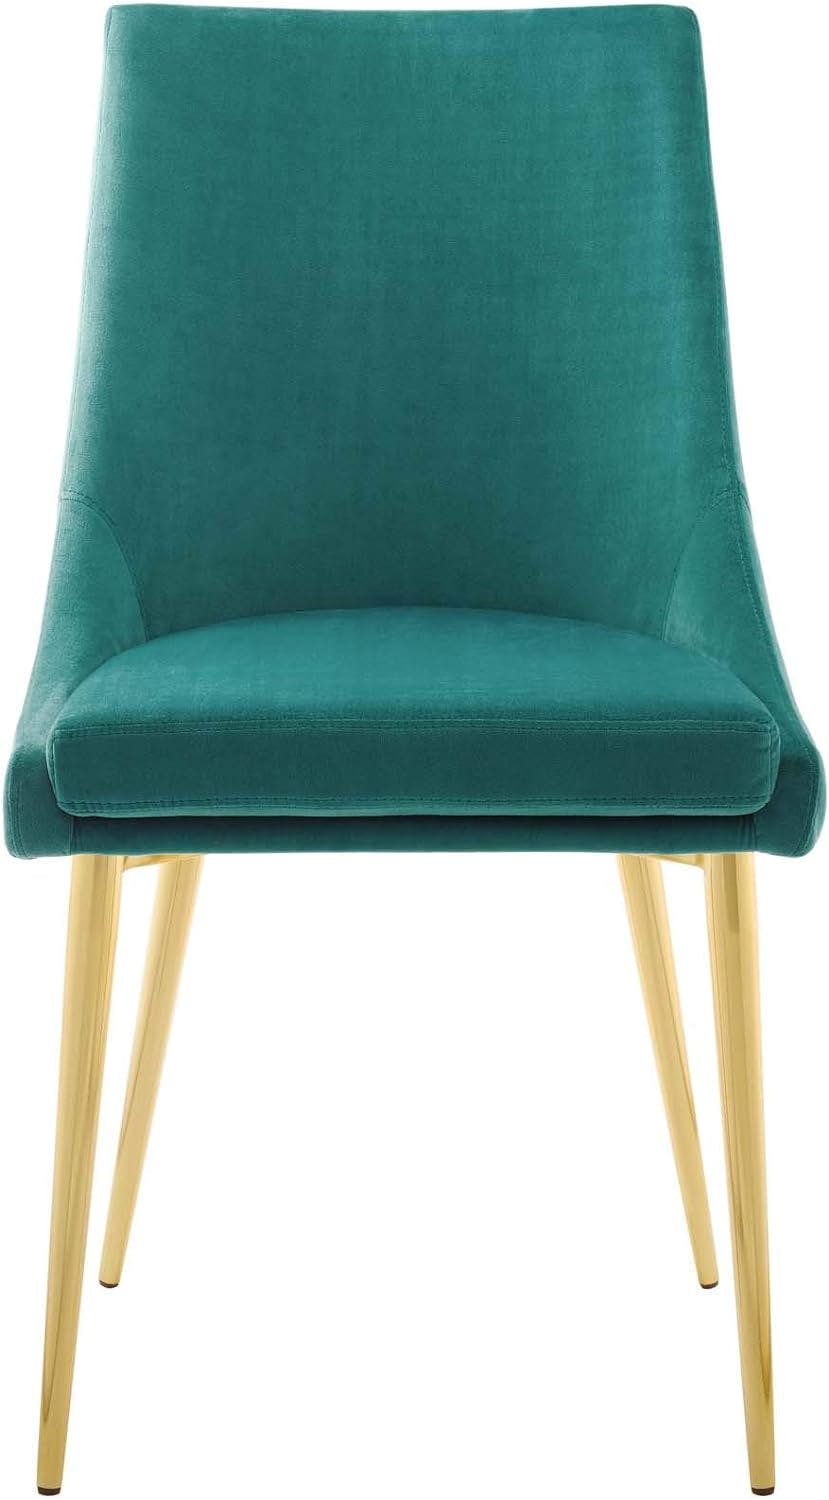 Teal Velvet Upholstered Accent Dining Chair with Metal Legs